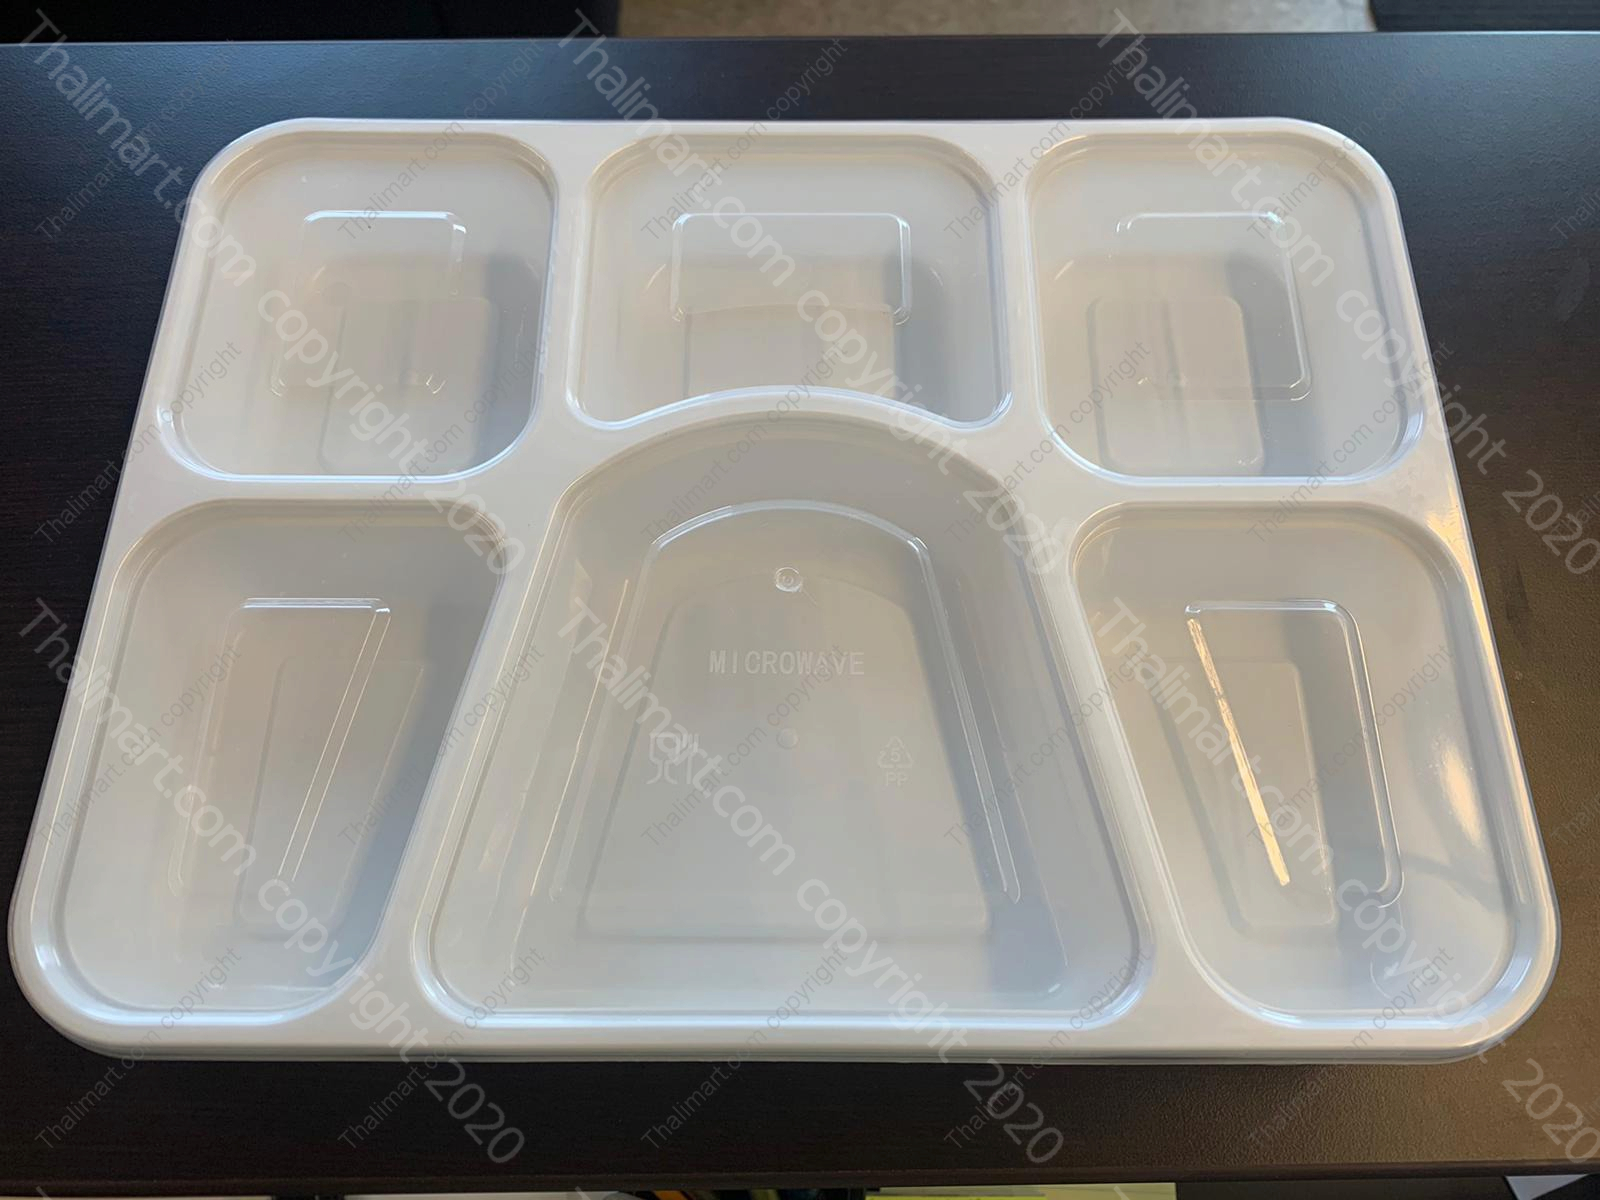 https://www.desiclik.com/images/D/6%20compartment%20food%20grade%20plastic%20plate%20with%20lid%20microwave%20safe%20leak%20resistant%20snap%20on%20tight%20lid%207.jpg